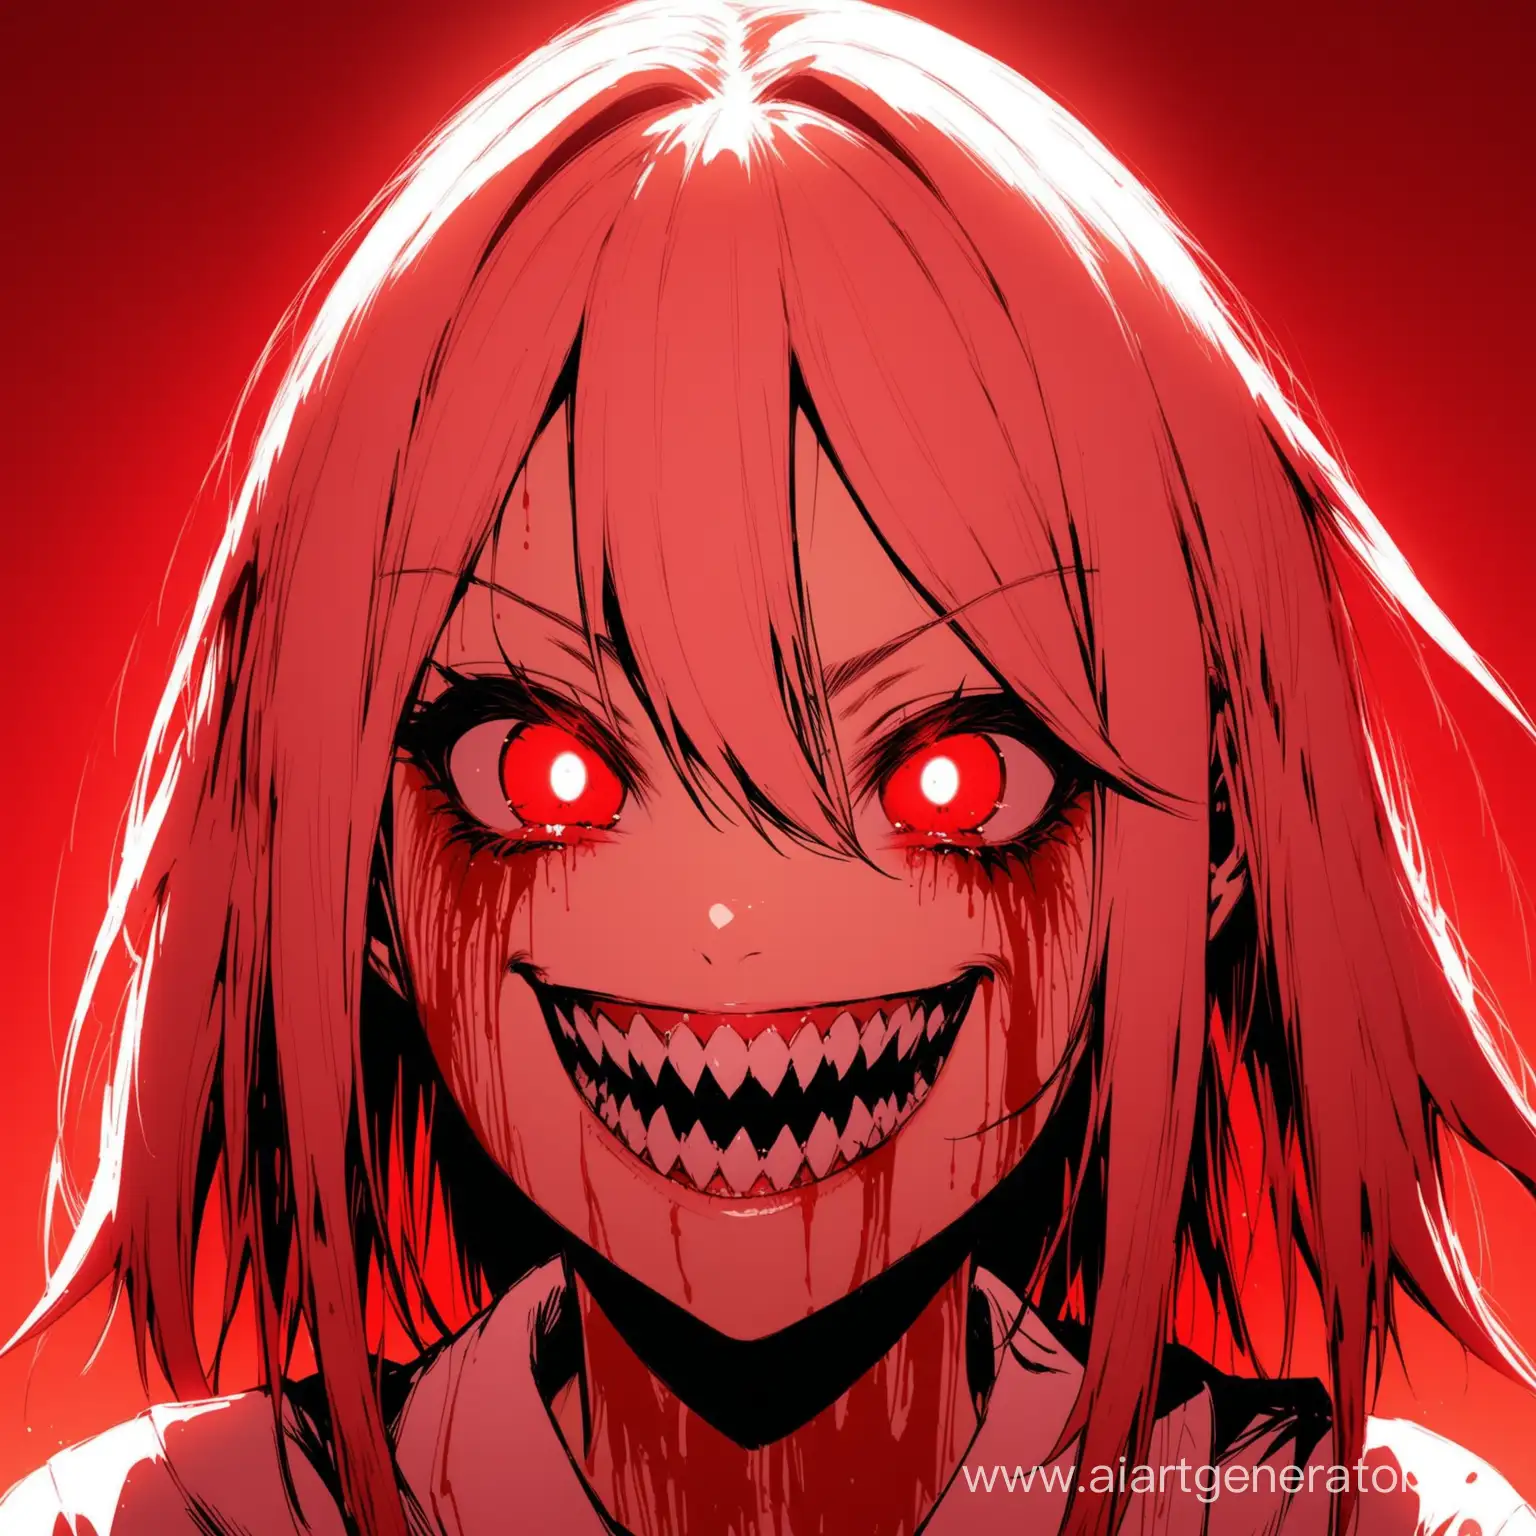 Sinister-Smiling-Girl-with-Sharp-Teeth-in-Red-Filtered-Horror-Scene